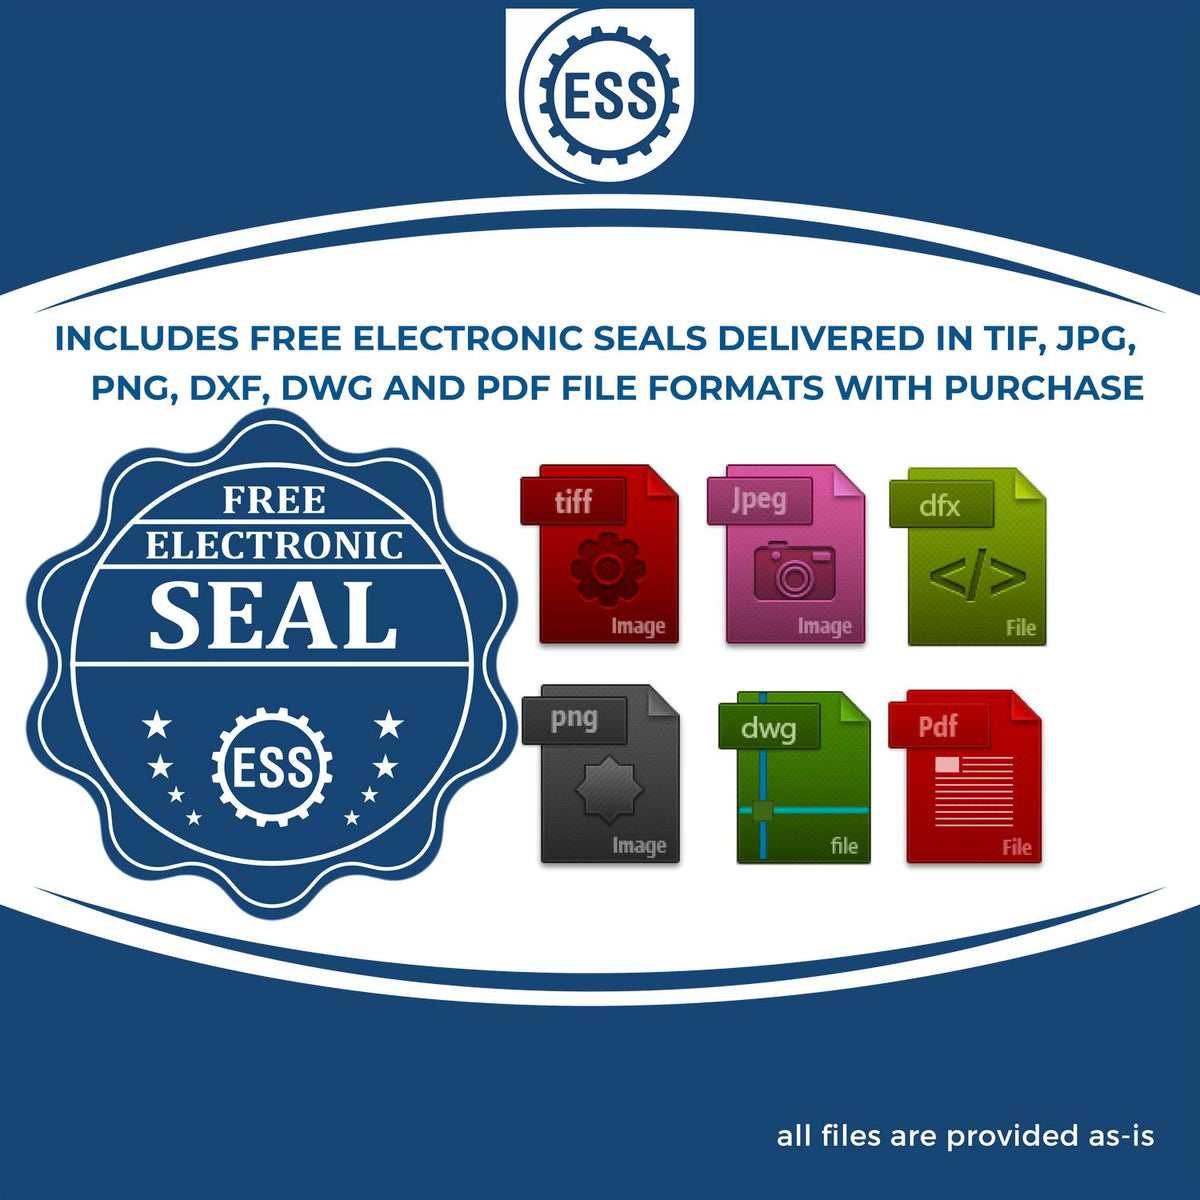 An infographic for the free electronic seal for the Hybrid Alaska Landscape Architect Seal illustrating the different file type icons such as DXF, DWG, TIF, JPG and PNG.